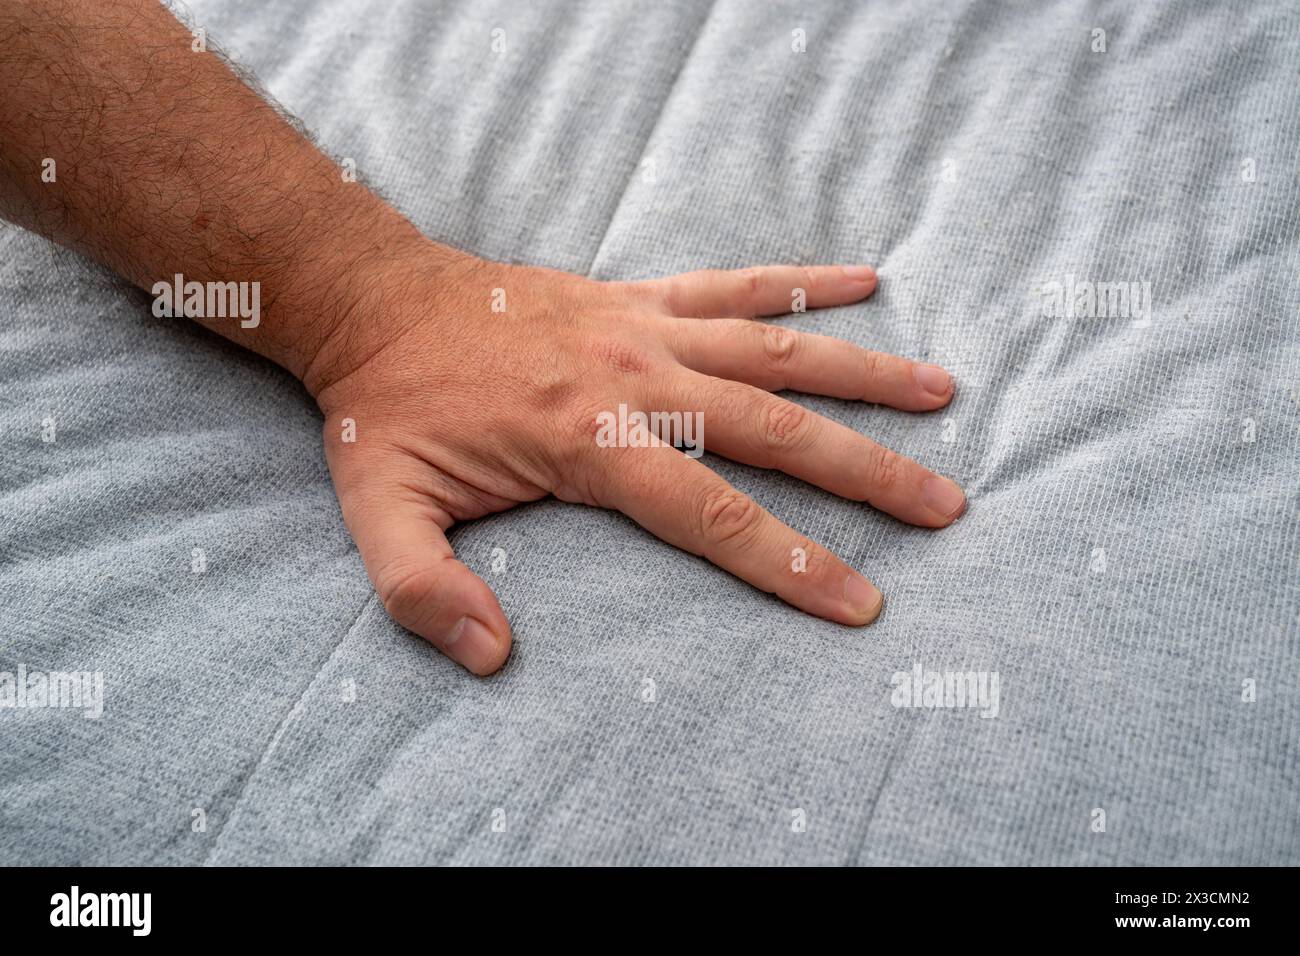 The man checks the quality and softness of the new mattress he will buy by pressing it with his hand Stock Photo